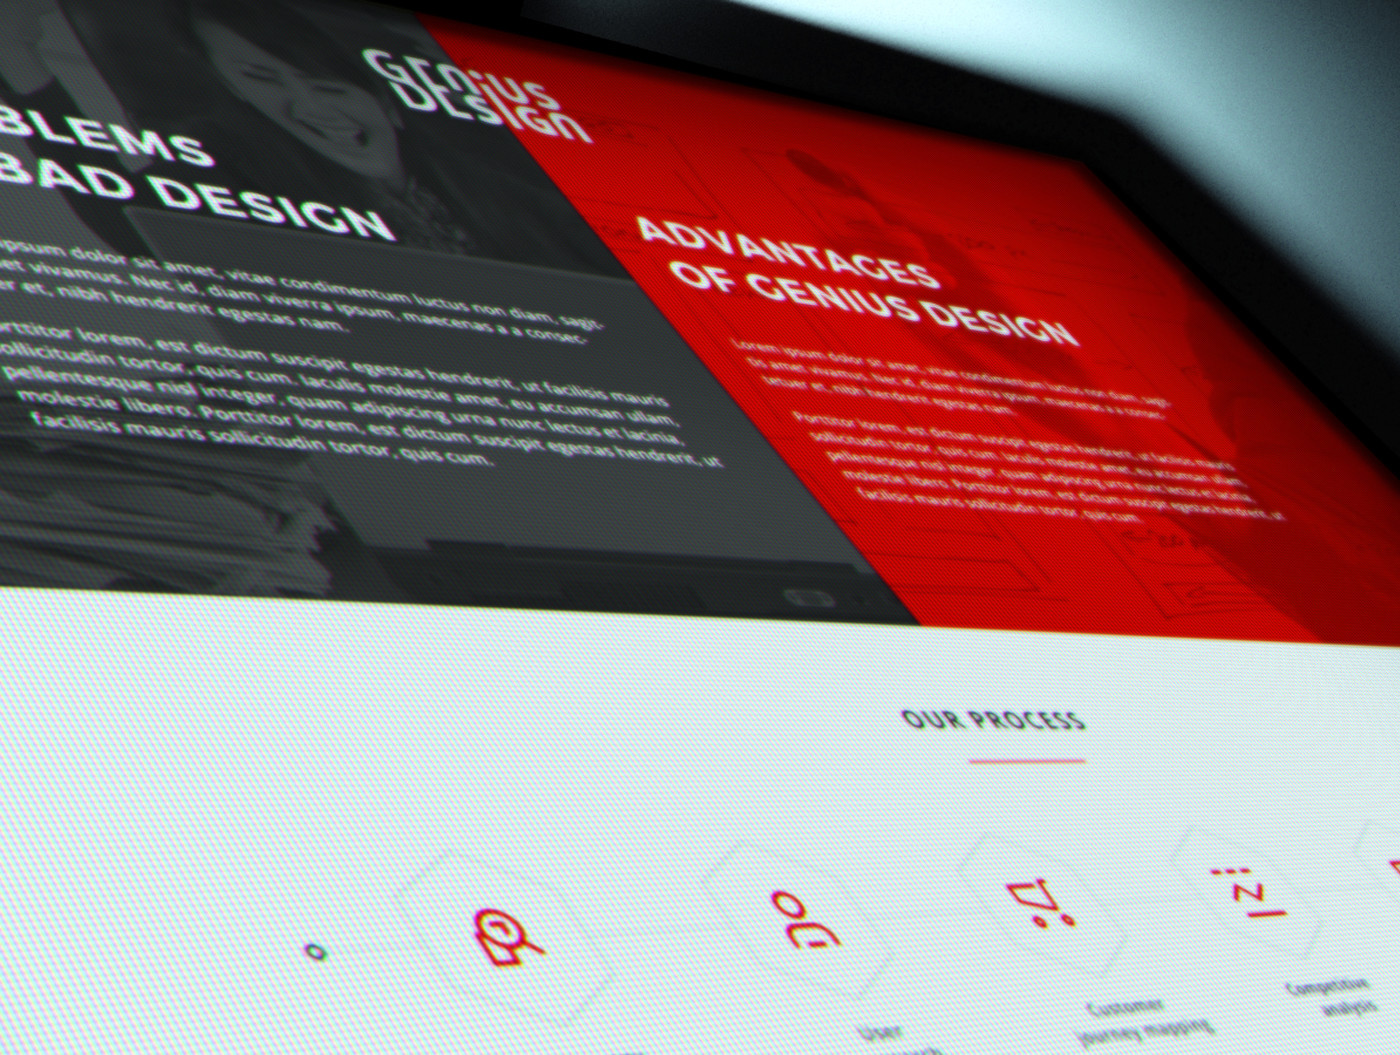 fortrus Website icons pictograms onepage develop red White